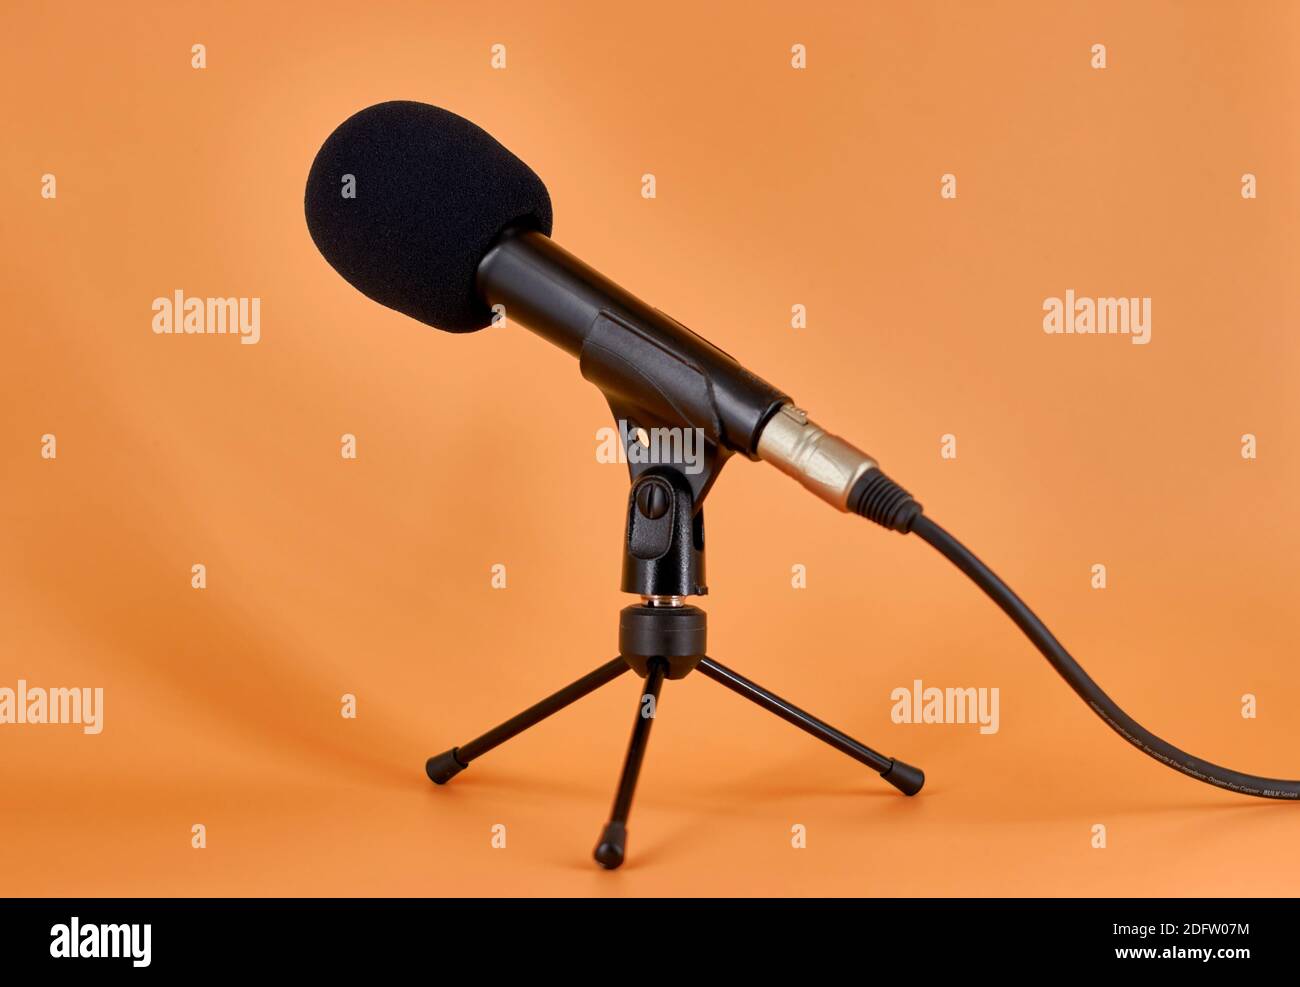 Dinamic microphone on a tripod table stand with protective sponge. Stock Photo